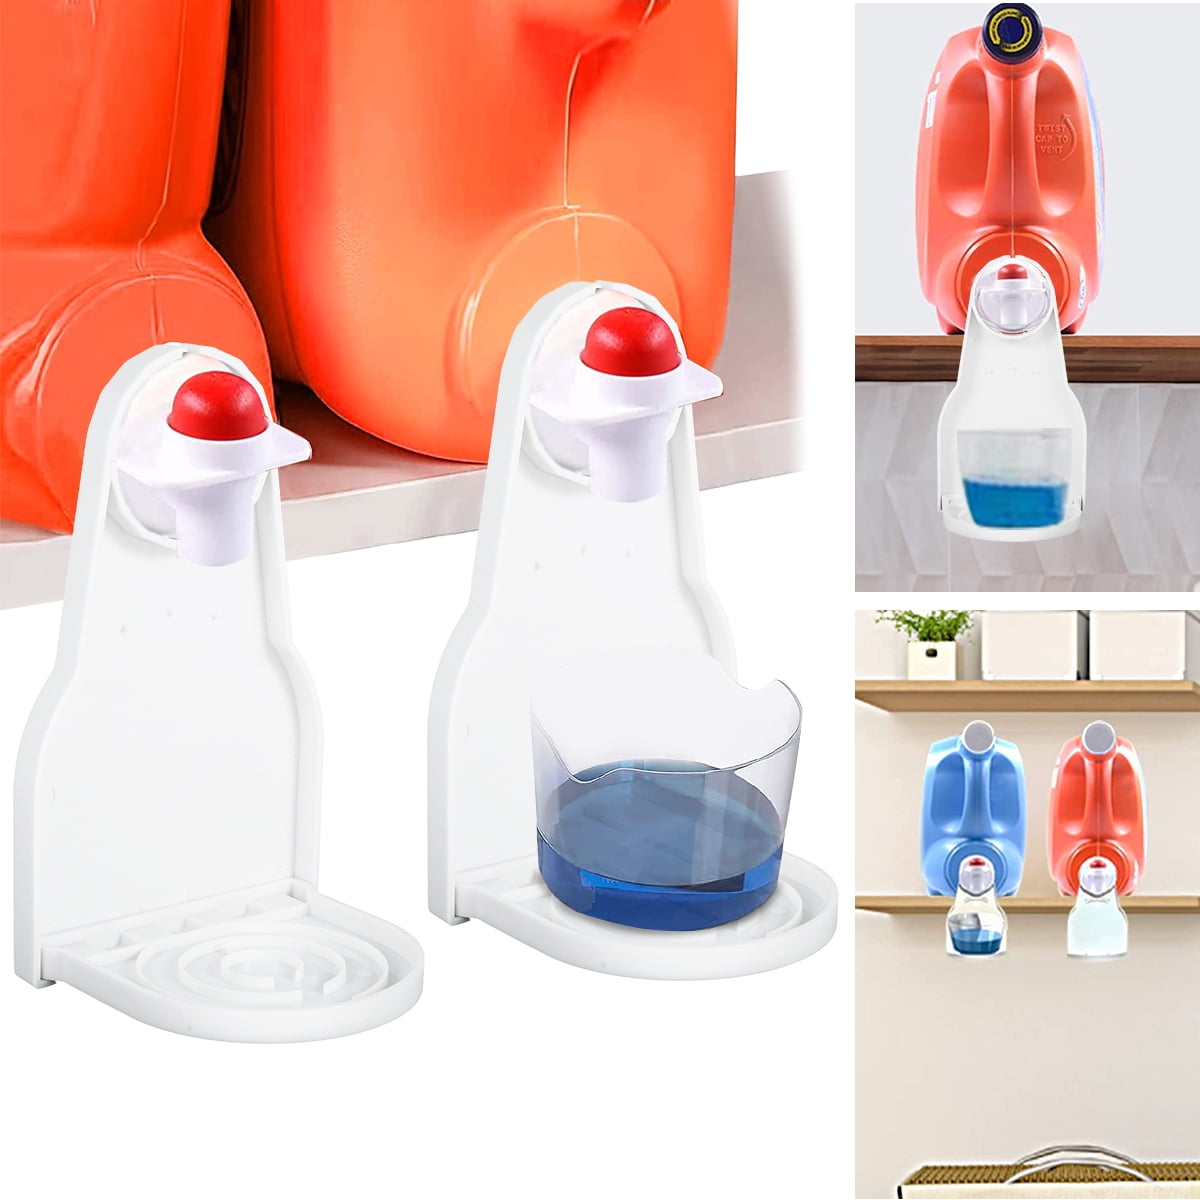 1 laundry detergent cup holder, laundry fabric softener drop trap